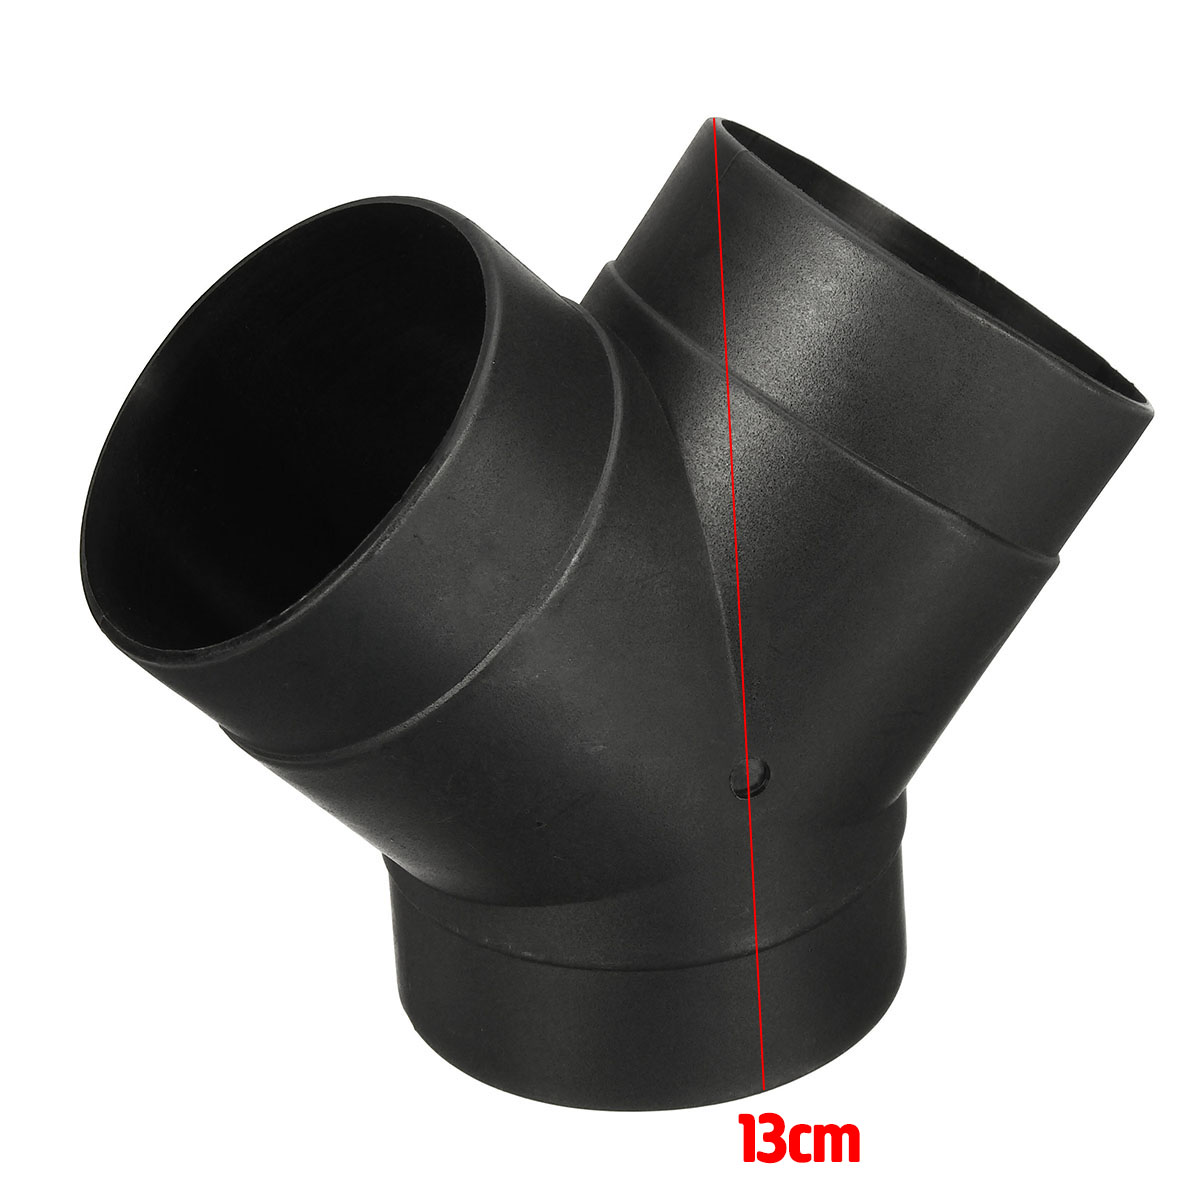 75mm-Heater-Pipe-Duct--Warm-Air-Outlet-For-Diesel-Heater-Webasto-Eberspacher-1396630-4